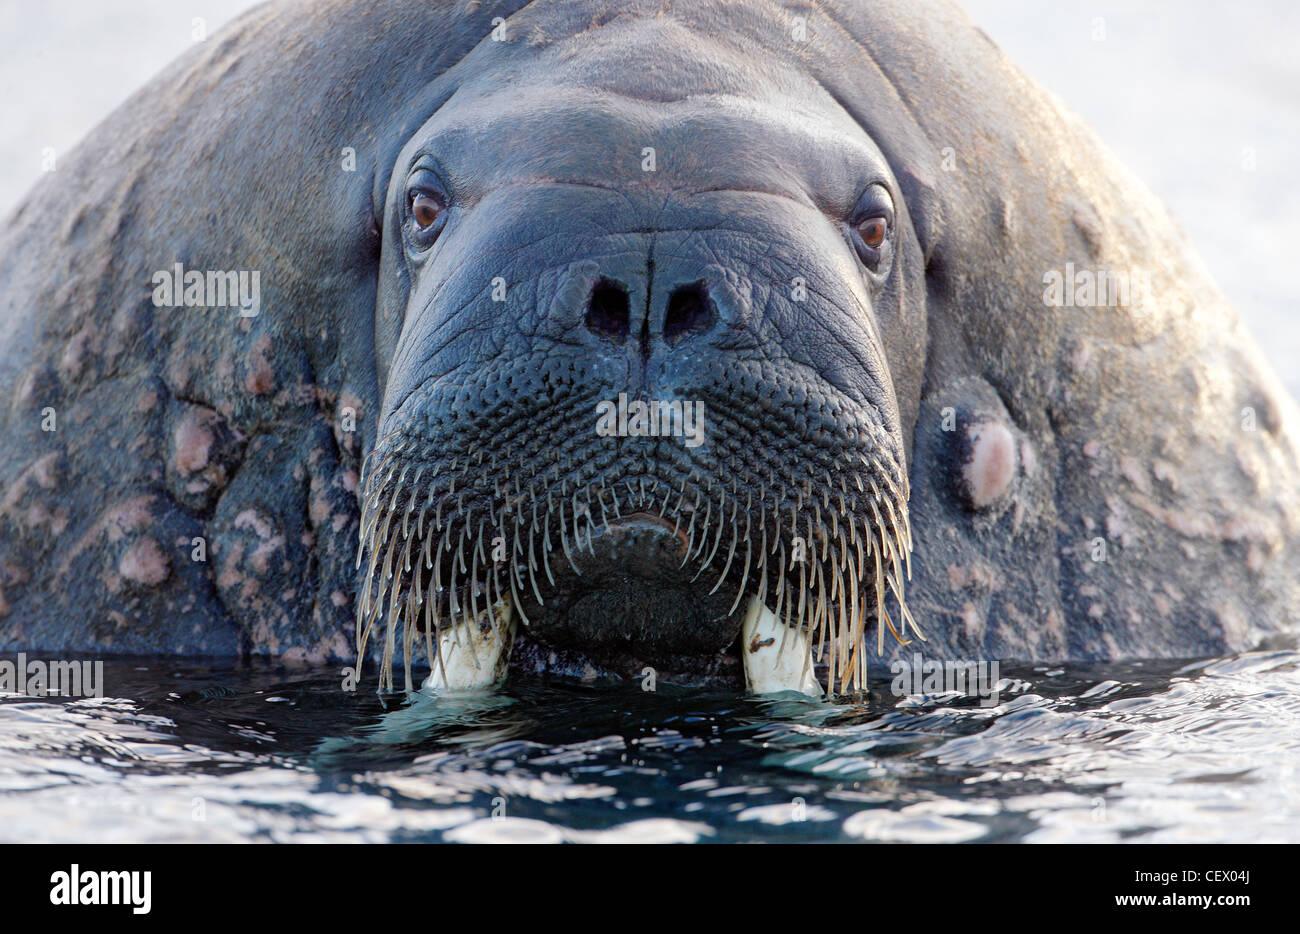 Walrus close-up, old scarred male, Svalbard, Norway Stock Photo